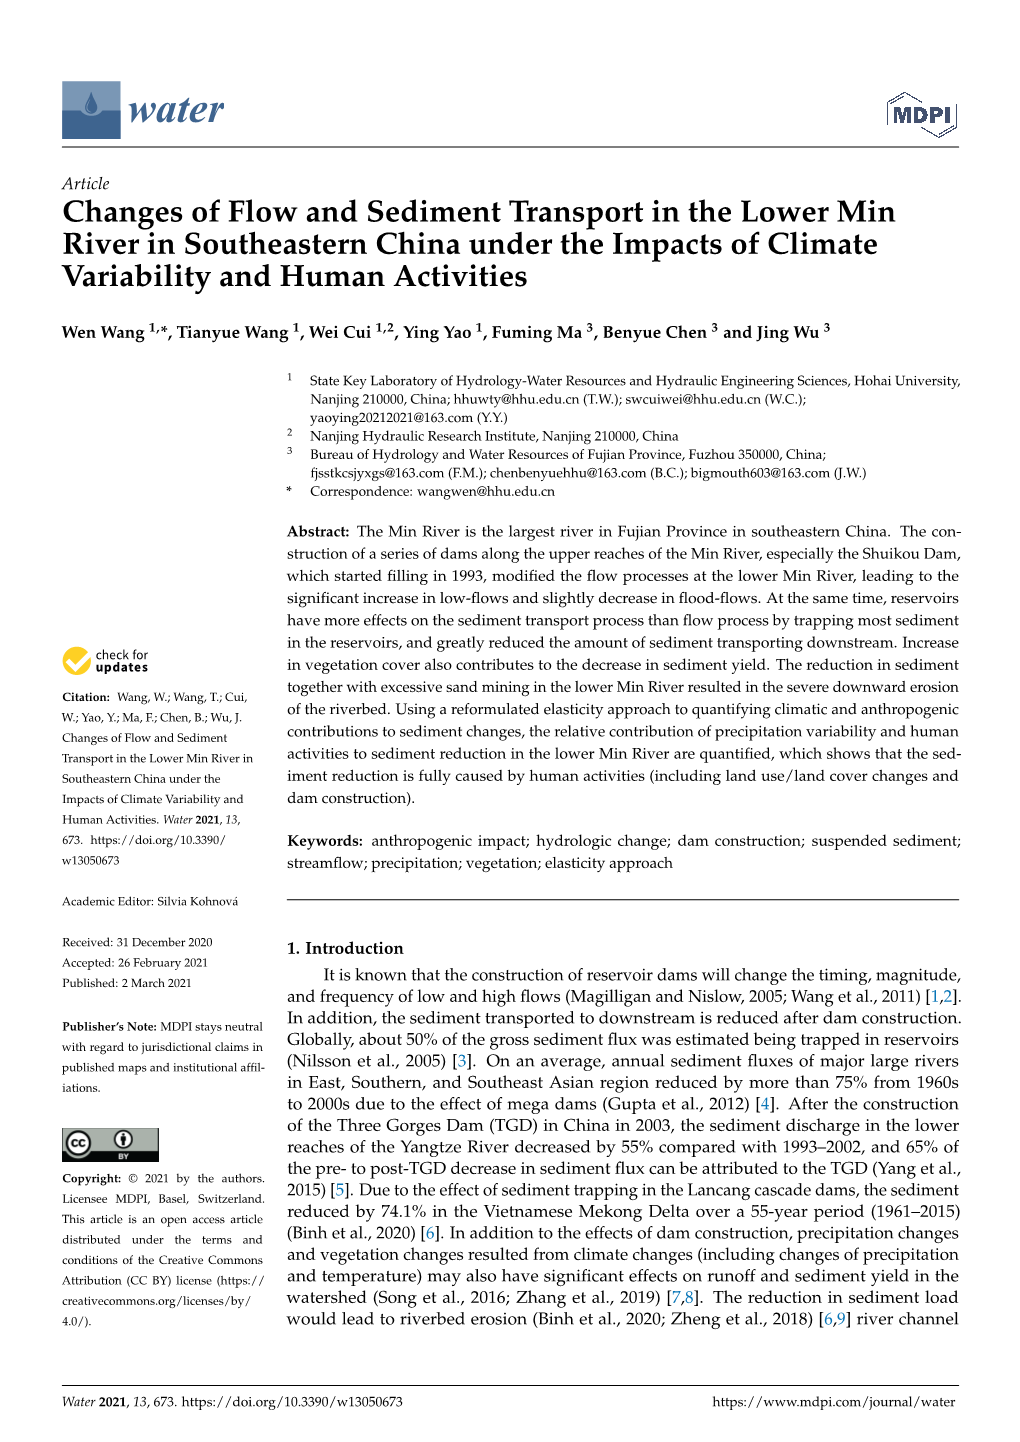 Changes of Flow and Sediment Transport in the Lower Min River in Southeastern China Under the Impacts of Climate Variability and Human Activities